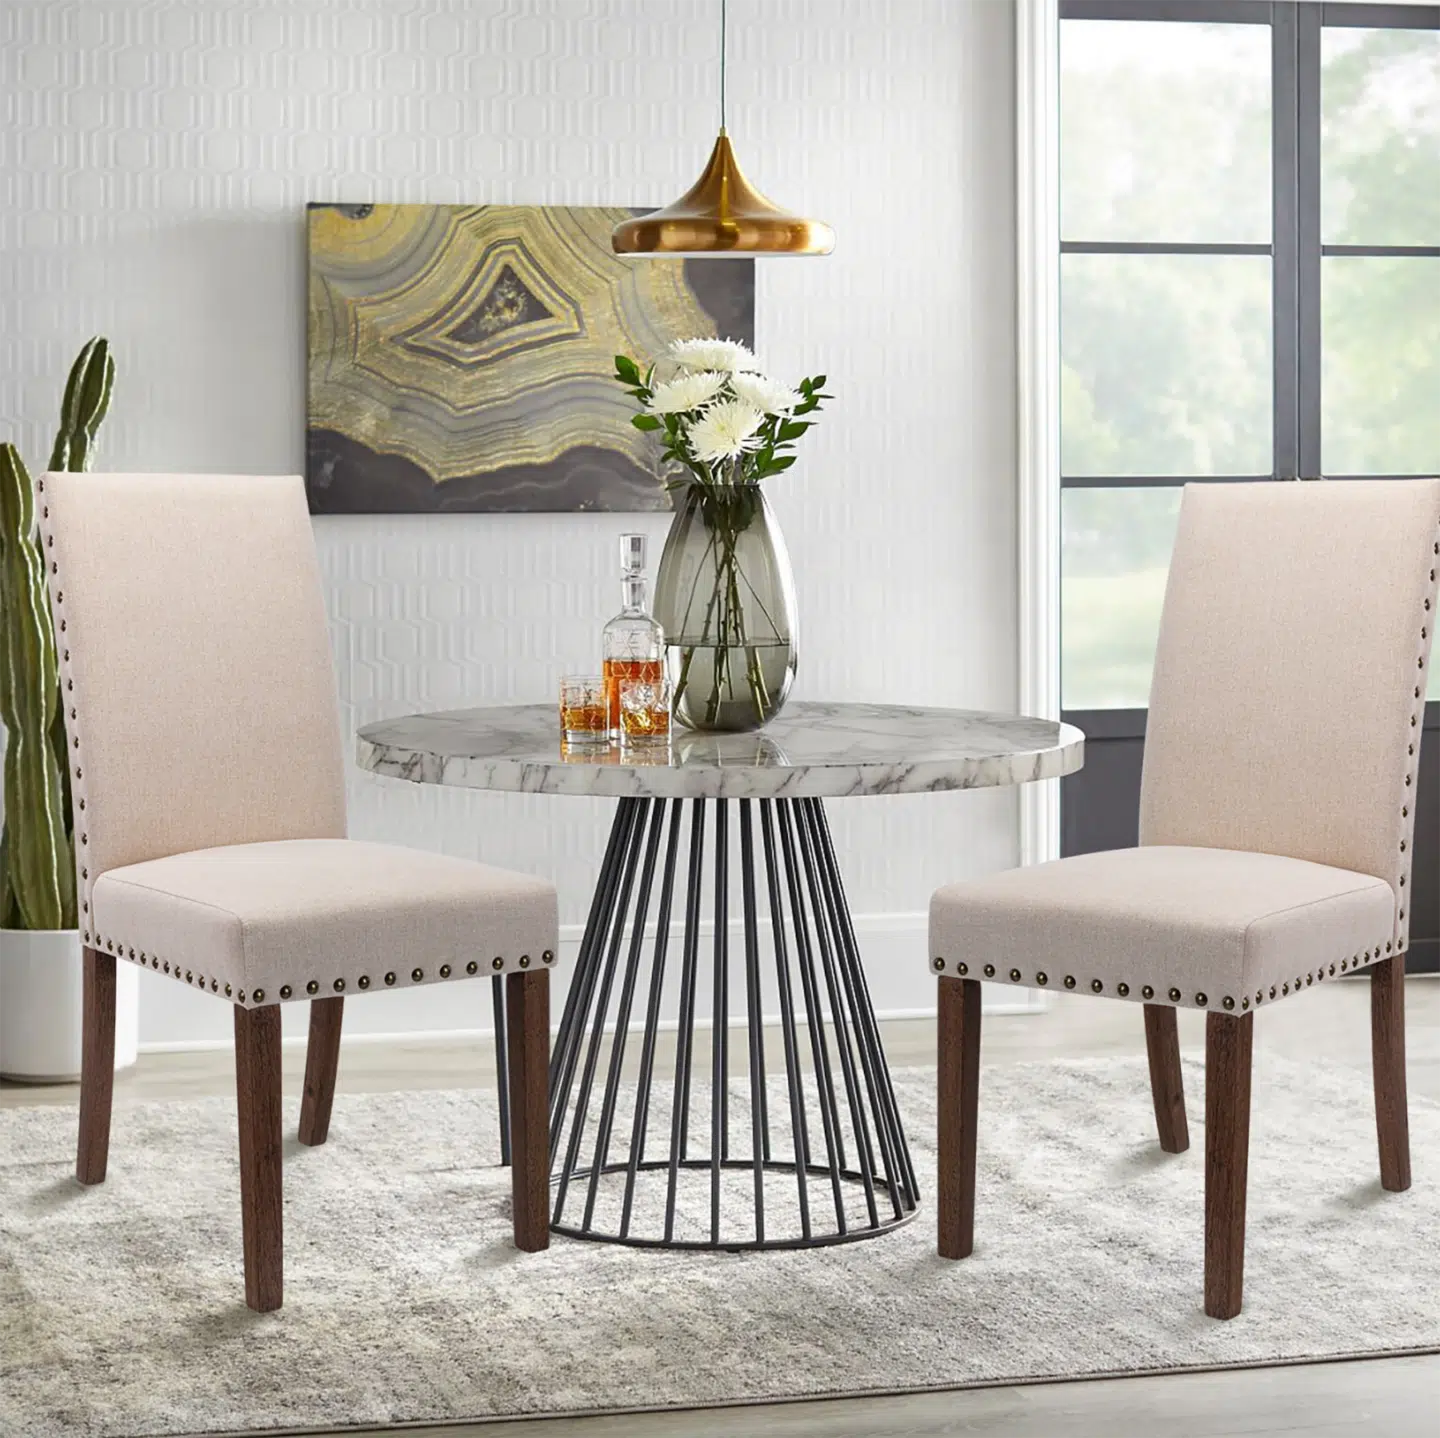 Gorgeous cream dining chairs, by home blogger What The Fab